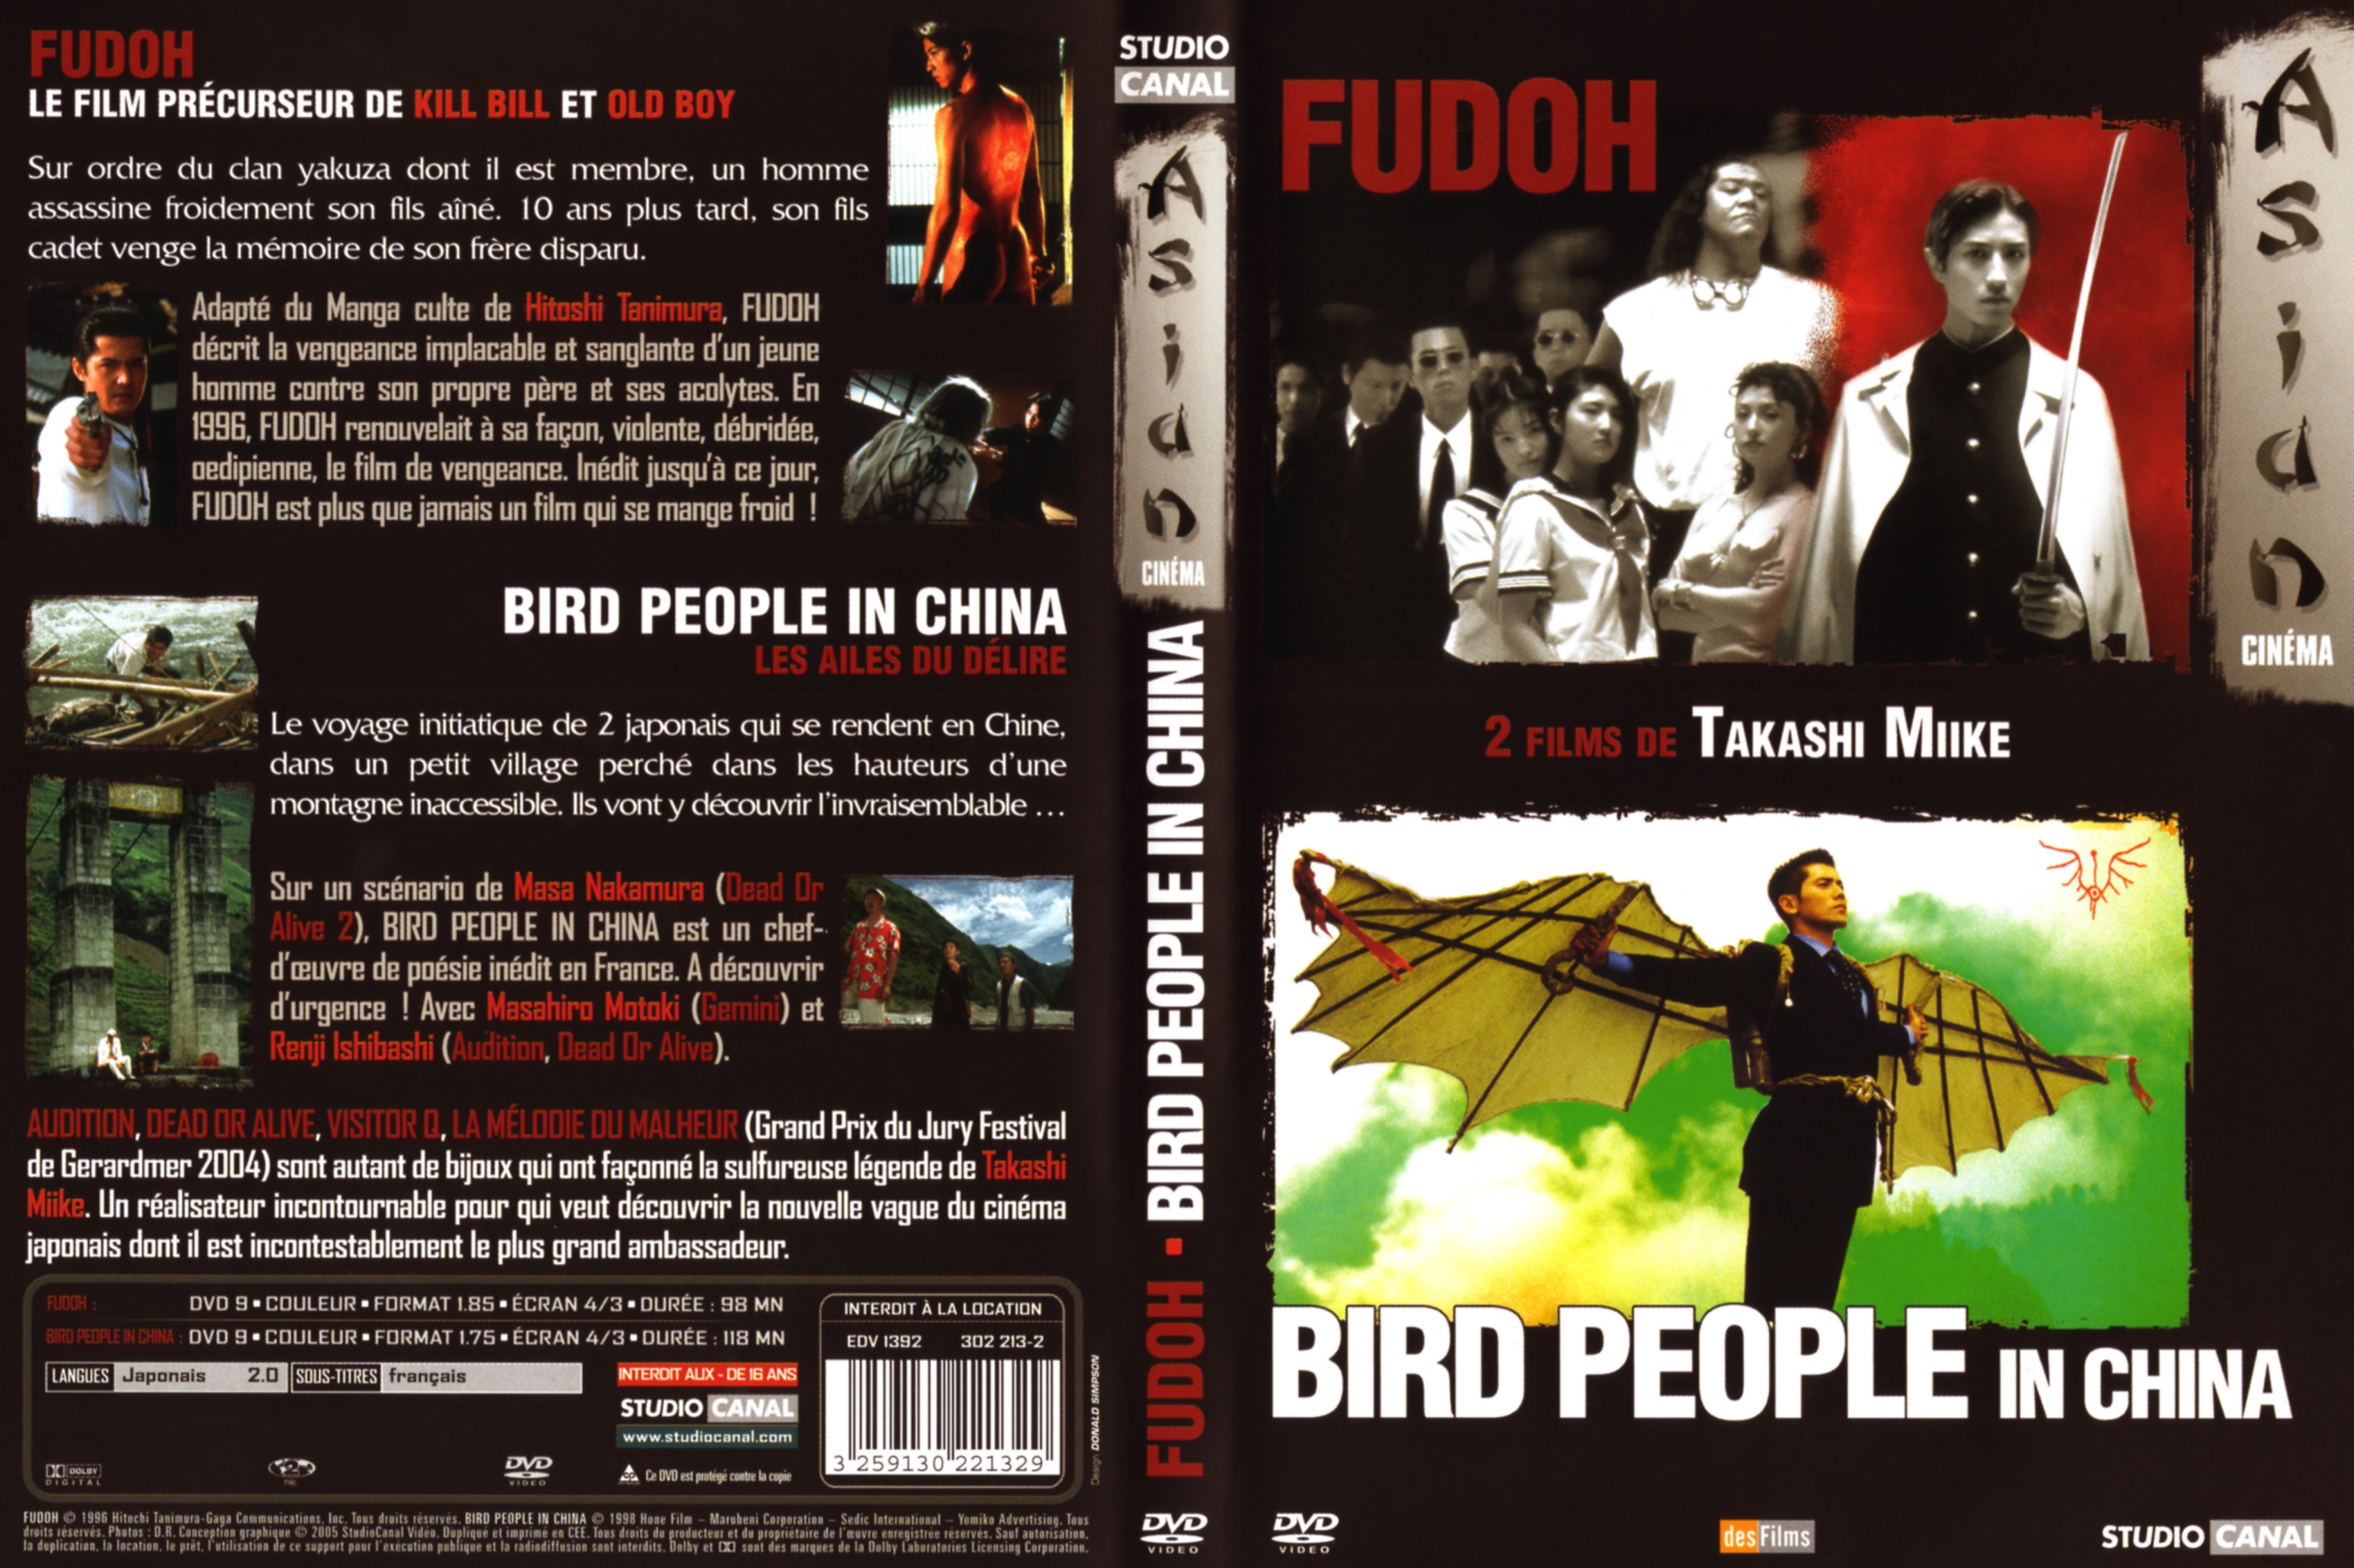 Jaquette DVD Fudoh + Bird people in China